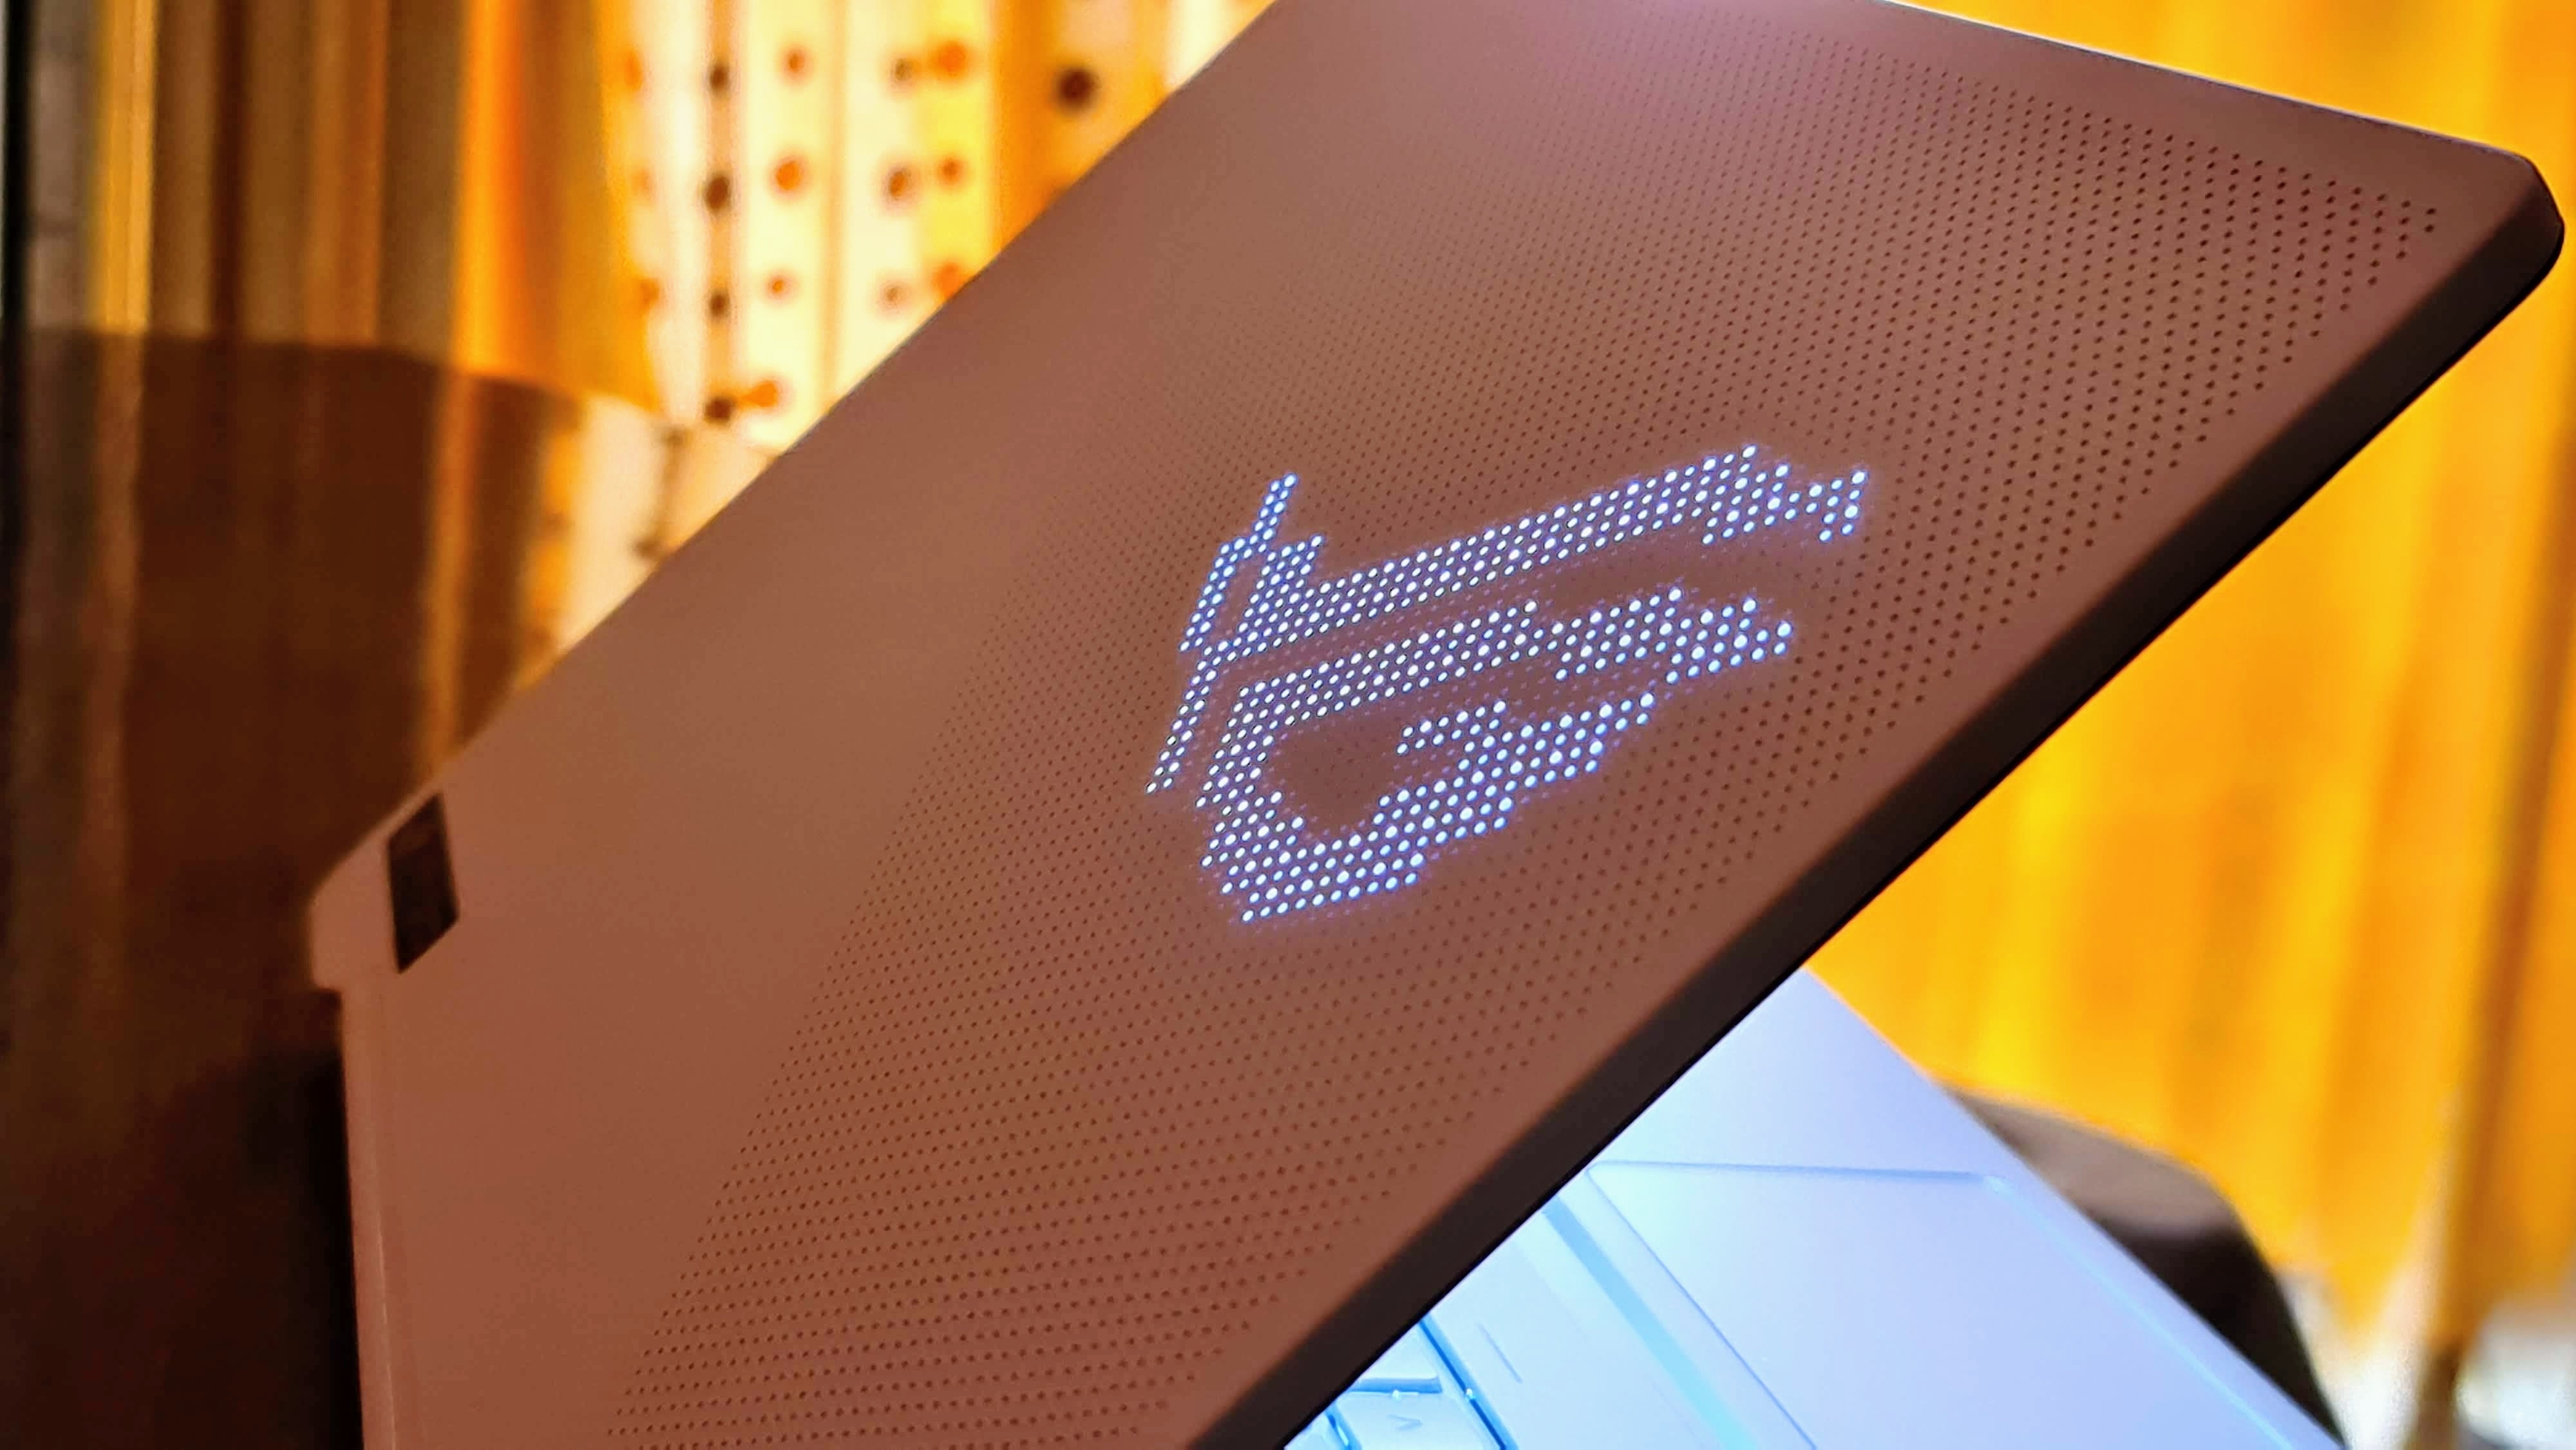 Asus ROG Zephyrus G14 review: Punches above its weight | Laptops-pc Reviews